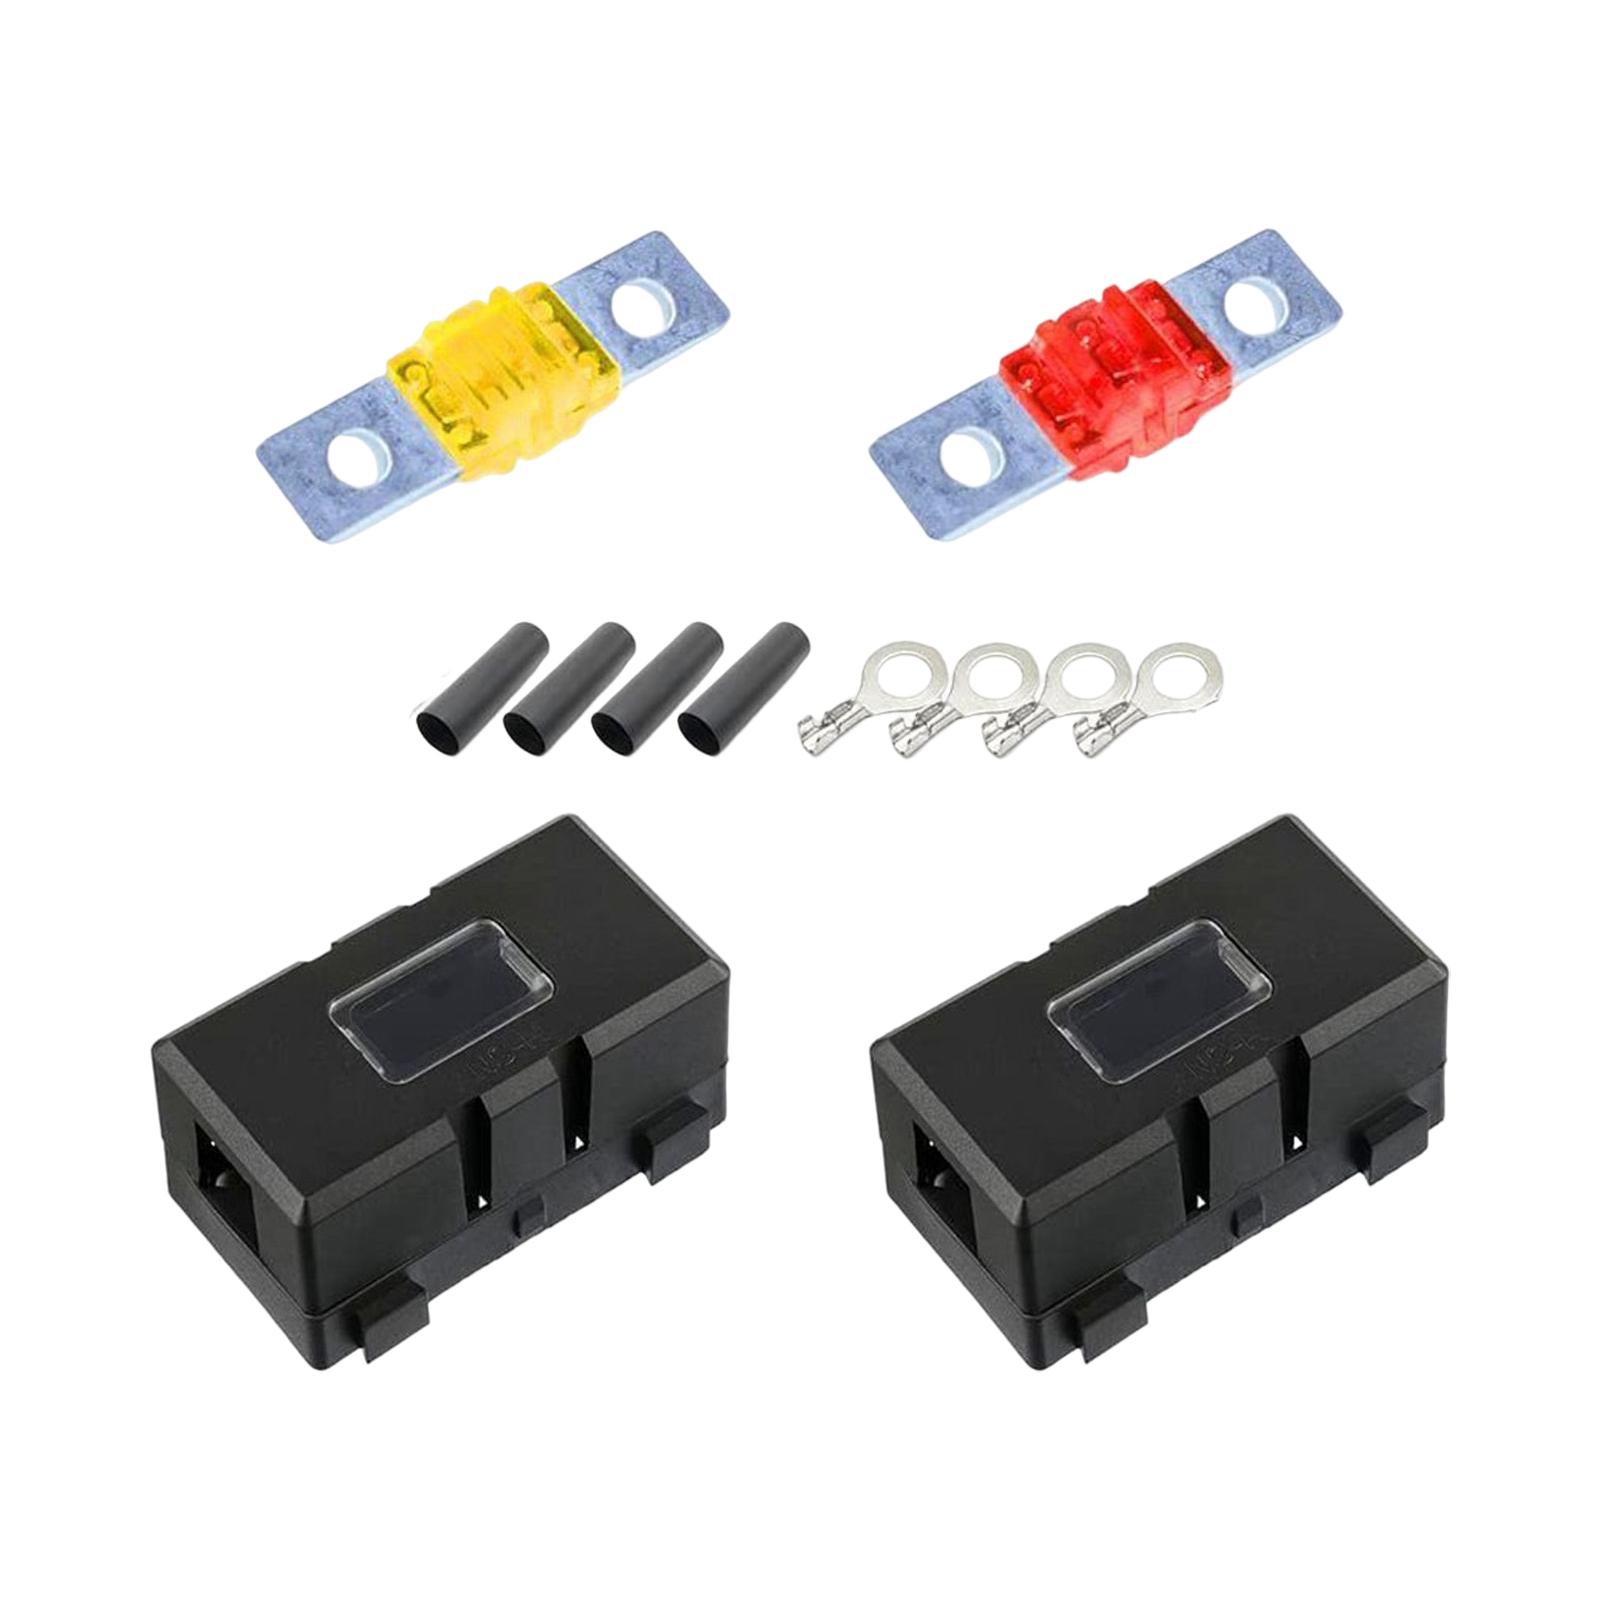 Car ANS Fuse Holder Block Durable Waterproof for Motorcycles Cars 2 Set 40A